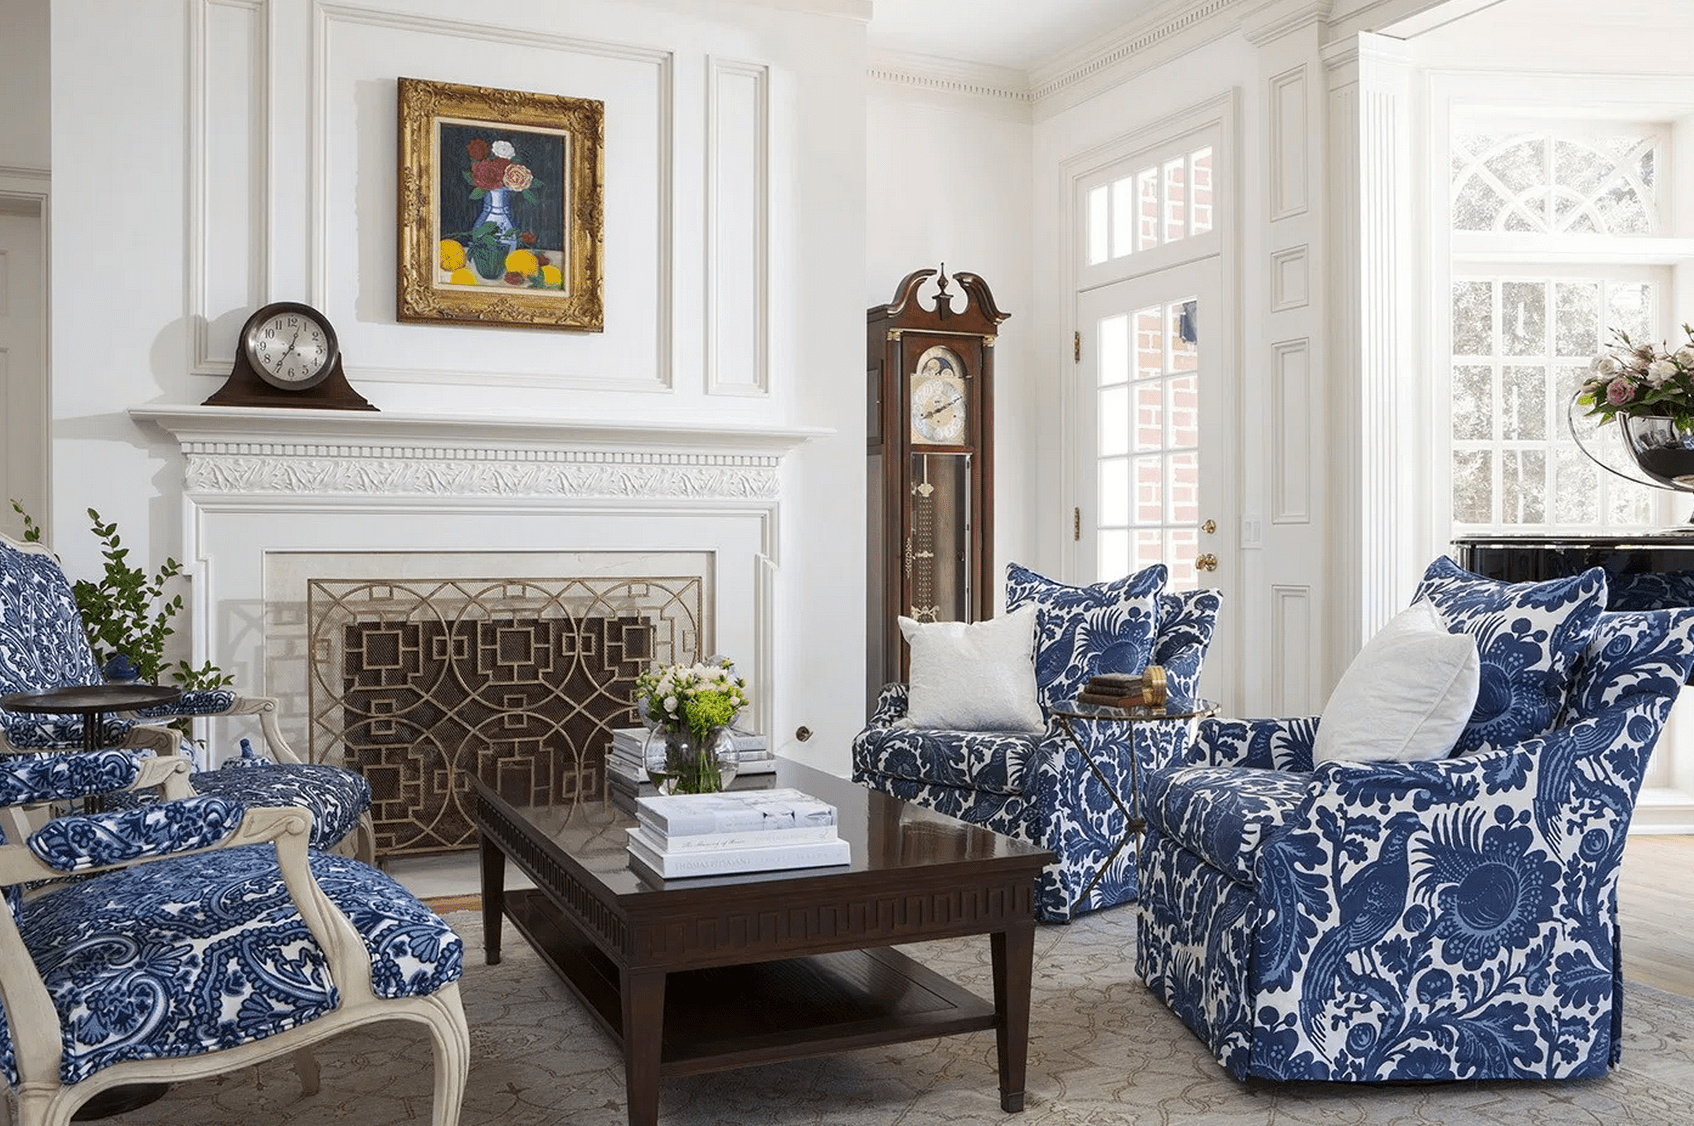 10 Wonderful Blue And White Living Room Decorating Ideas 23 traditional living rooms for inspiration 2024